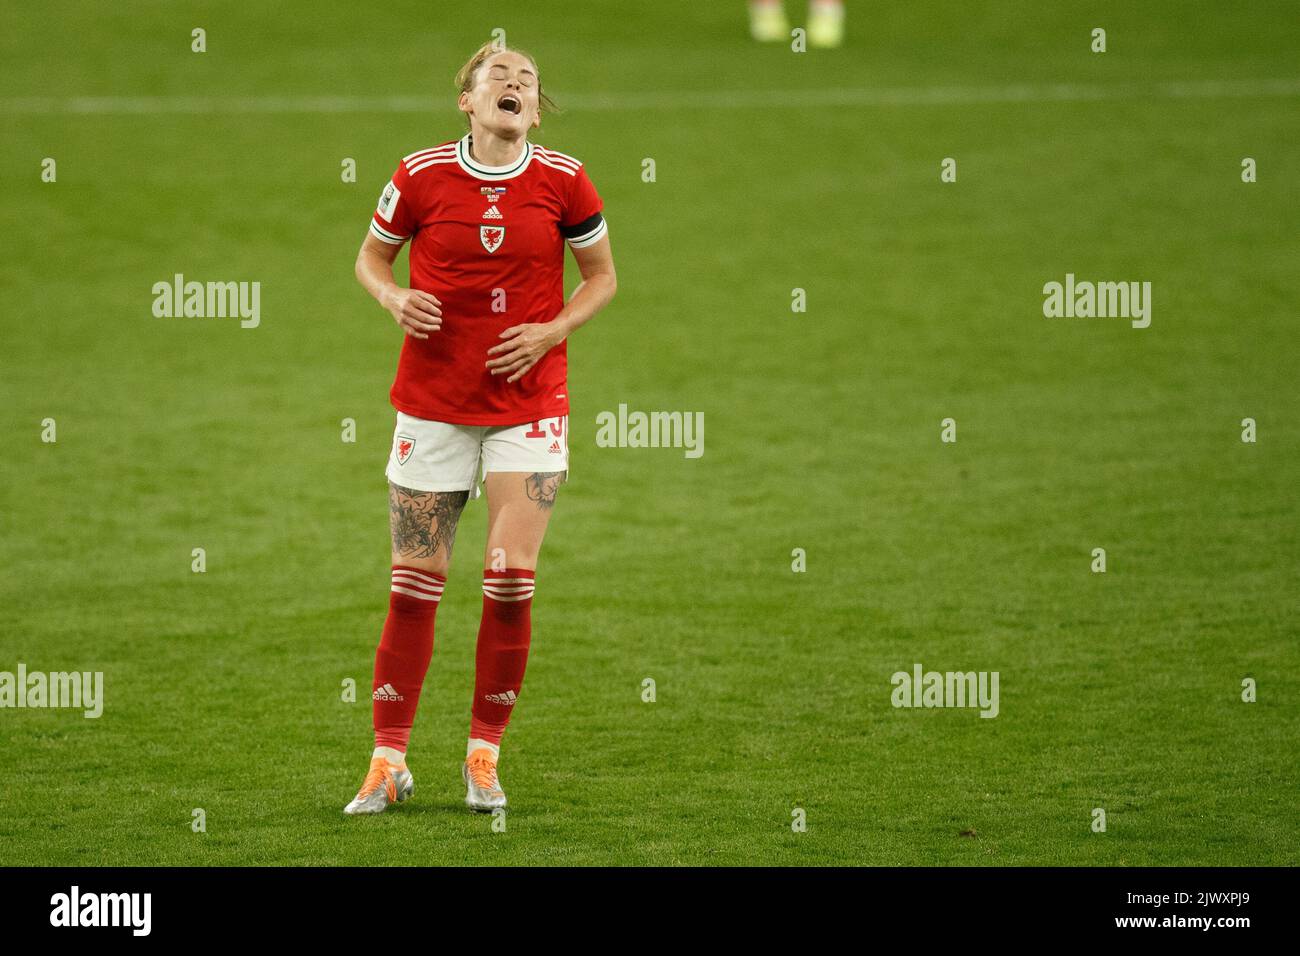 Cardiff, UK. 6th Sep, 2022. Rachel Rowe of Wales reacts after going close during the Wales v Slovenia Women's World Cup Qualification match. Credit: Gruffydd Thomas/Alamy Live News Stock Photo